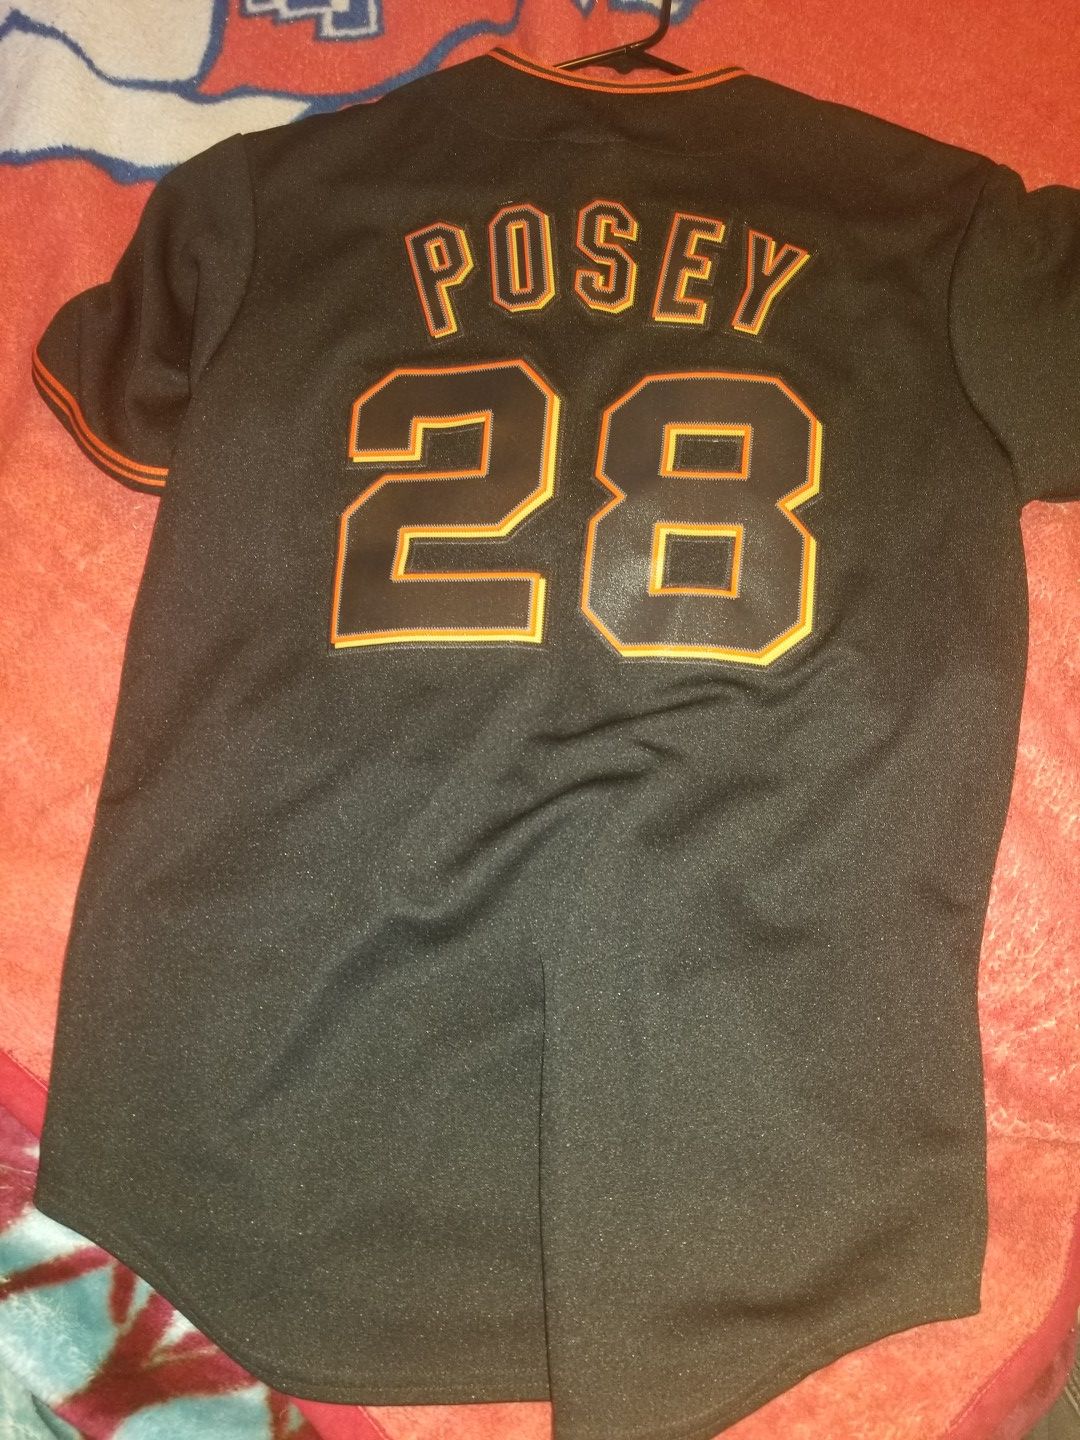 Buster Posey Majestic Jersey